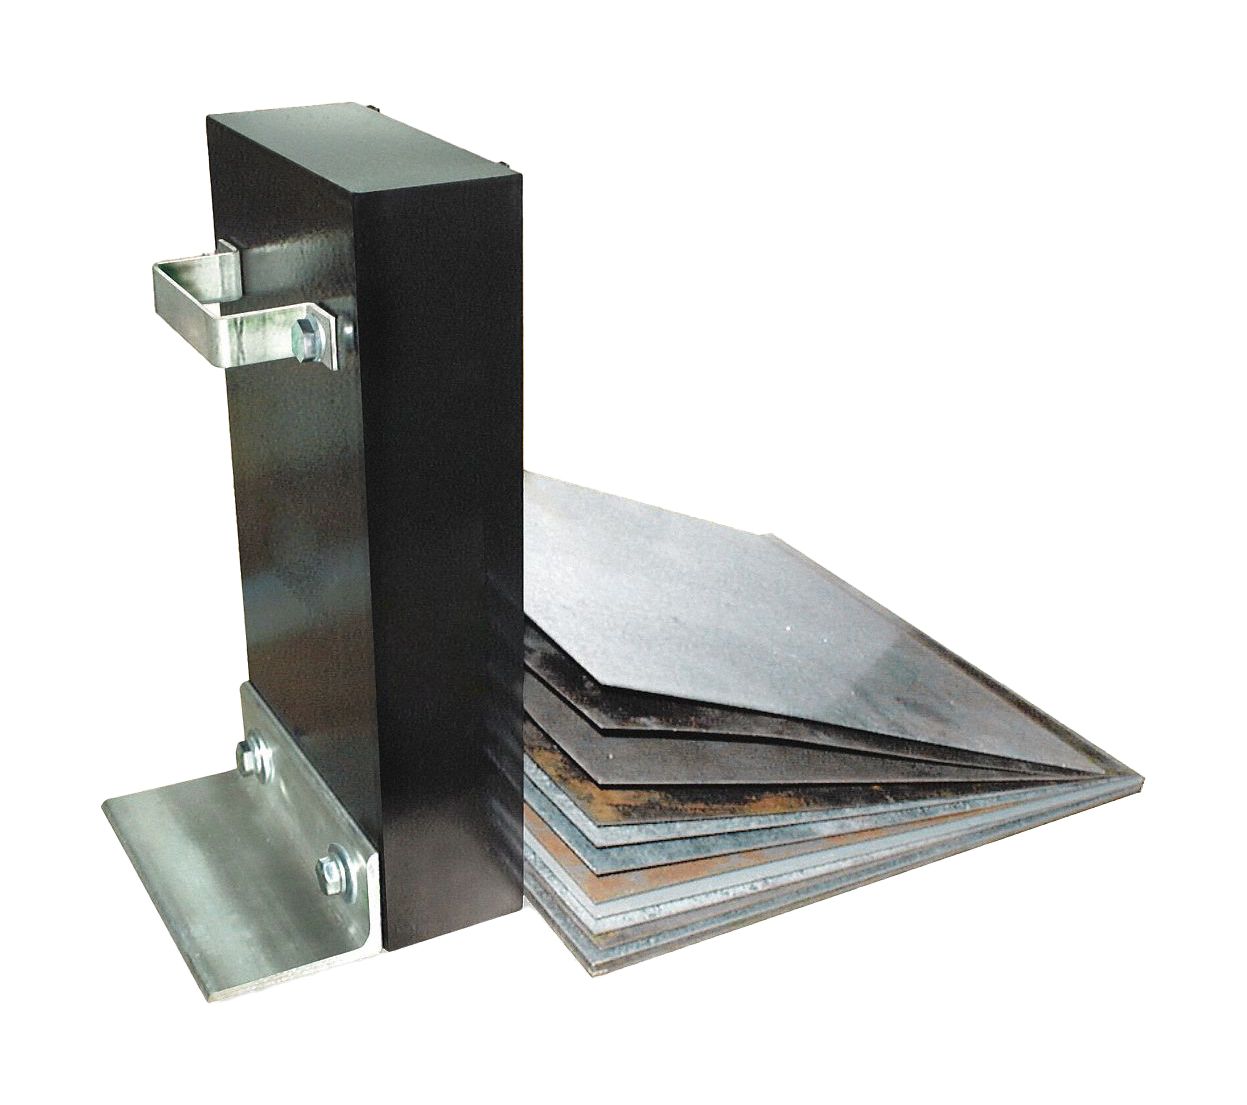 Magnetic metal sheet separator - SELOS - Experts on magnetics from 1991.